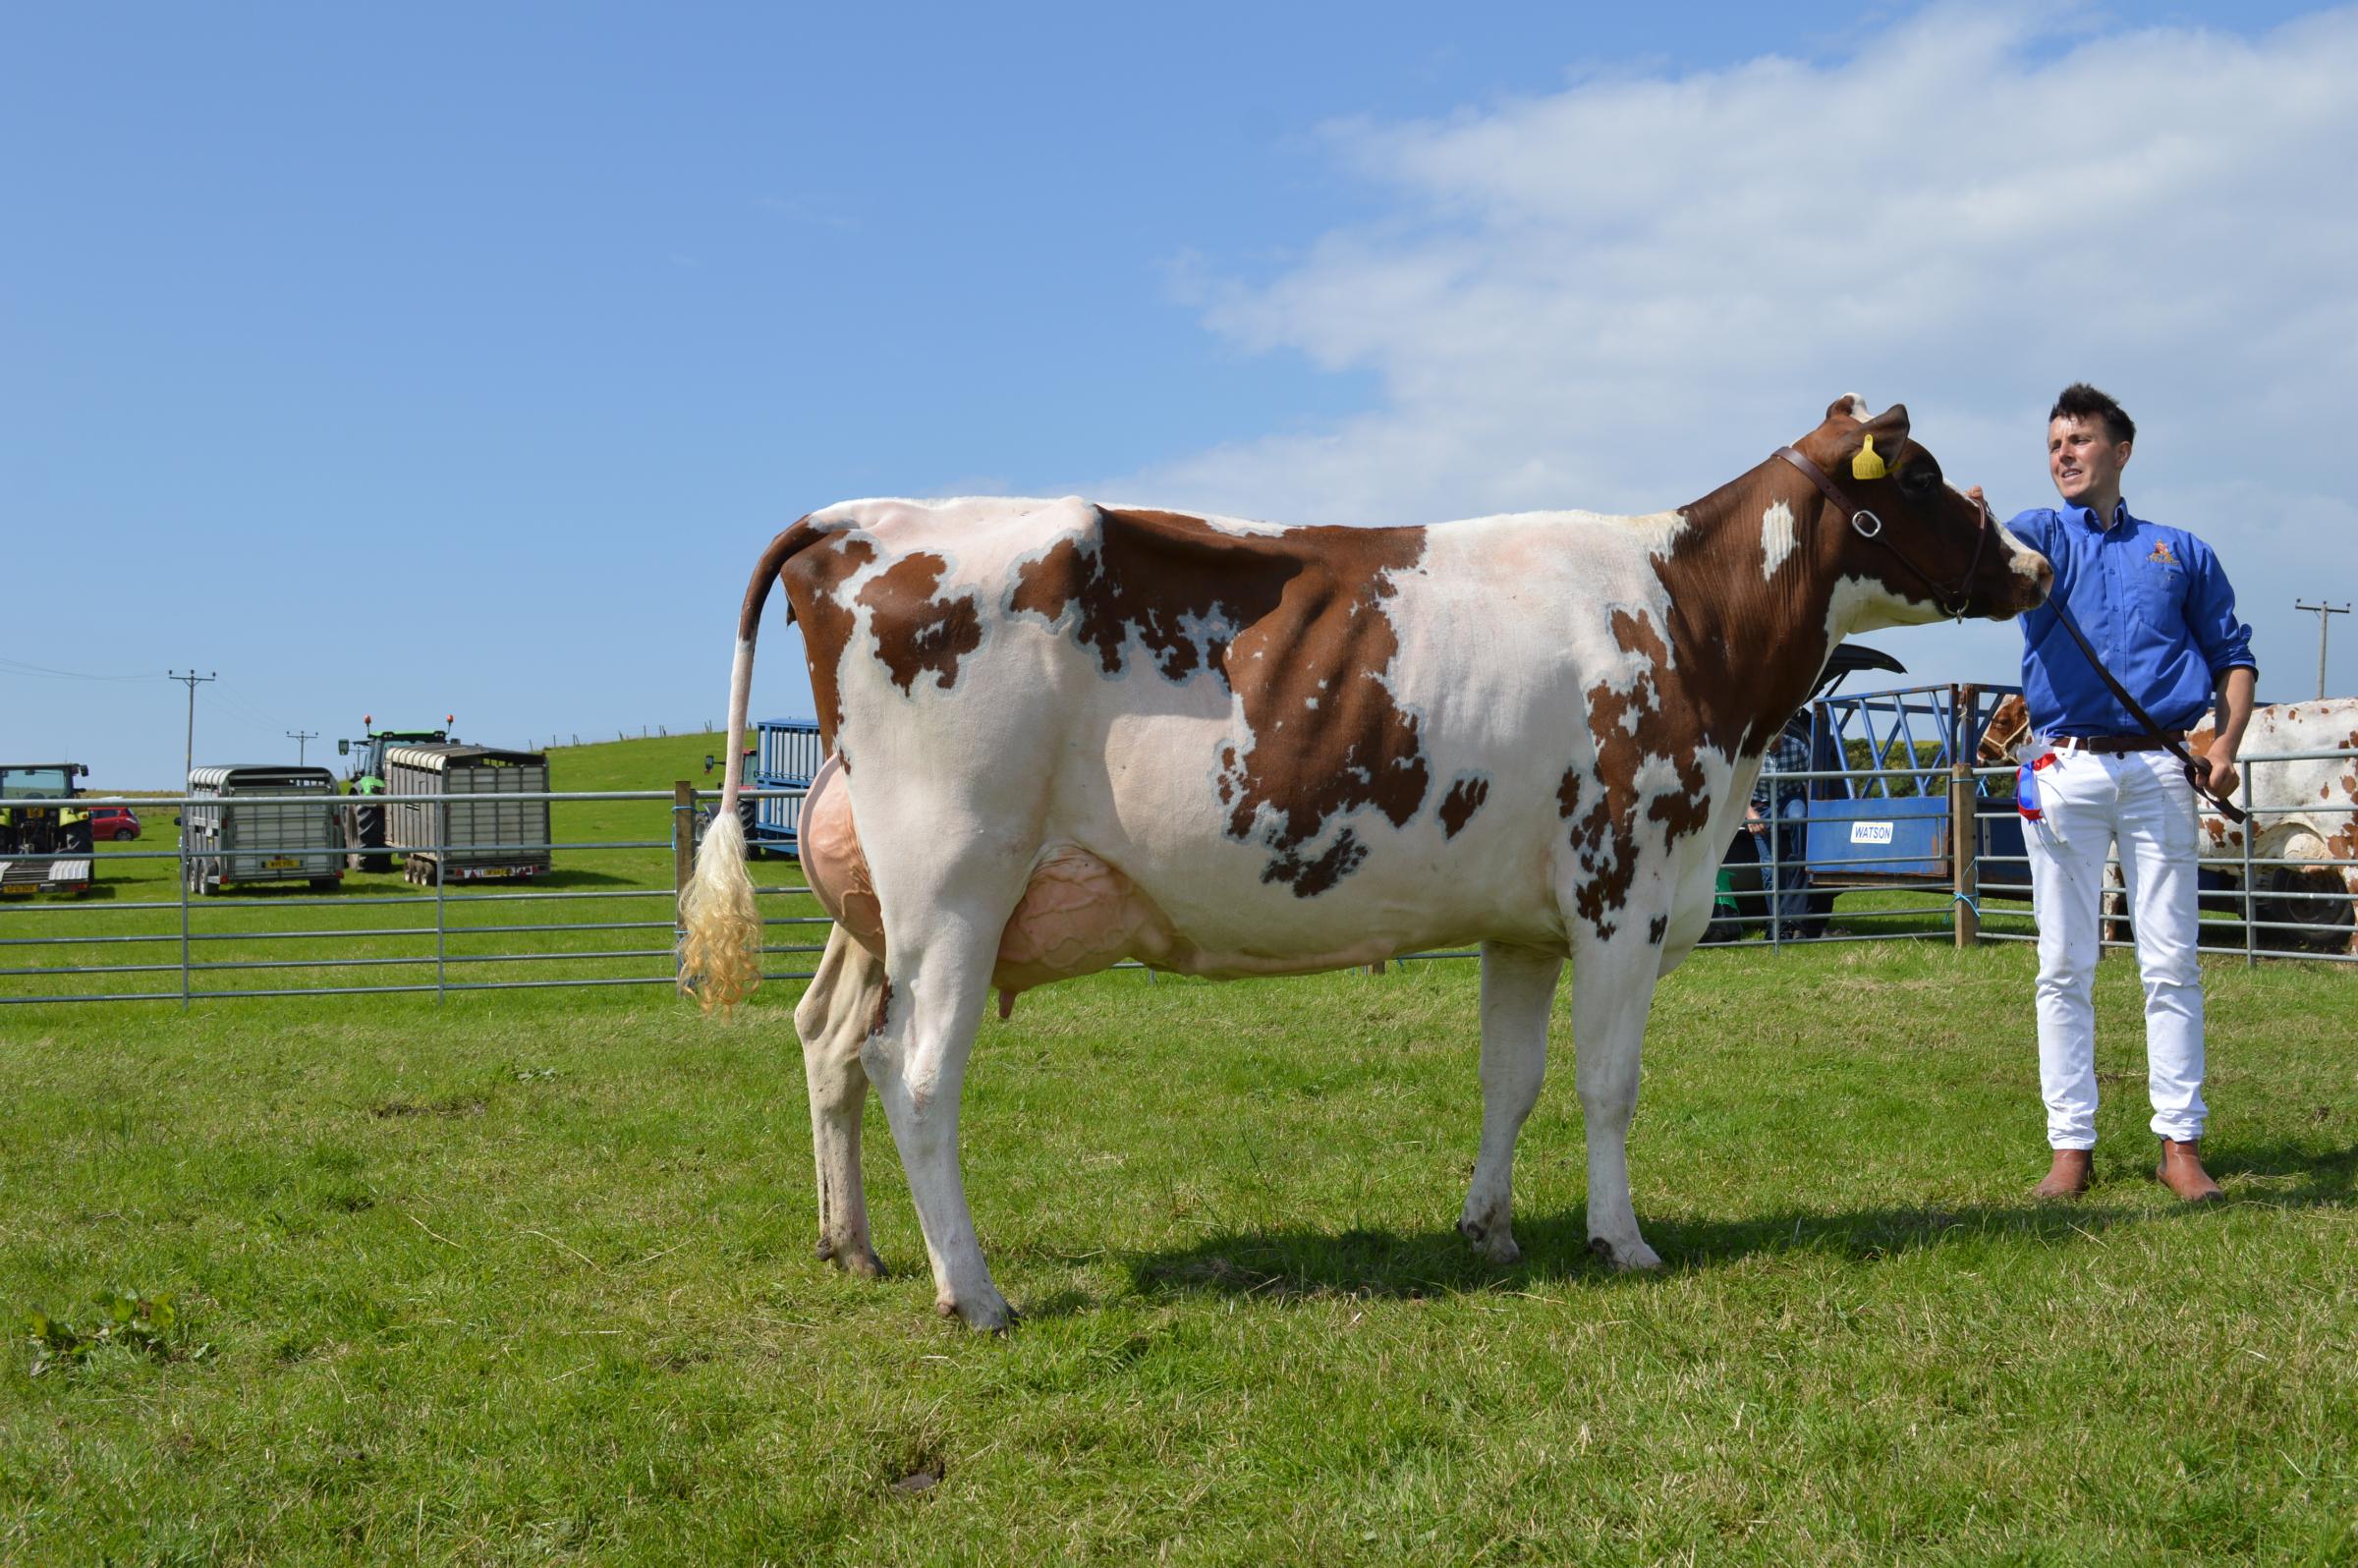 The dairy inter-breed went to the Ayrshire winner